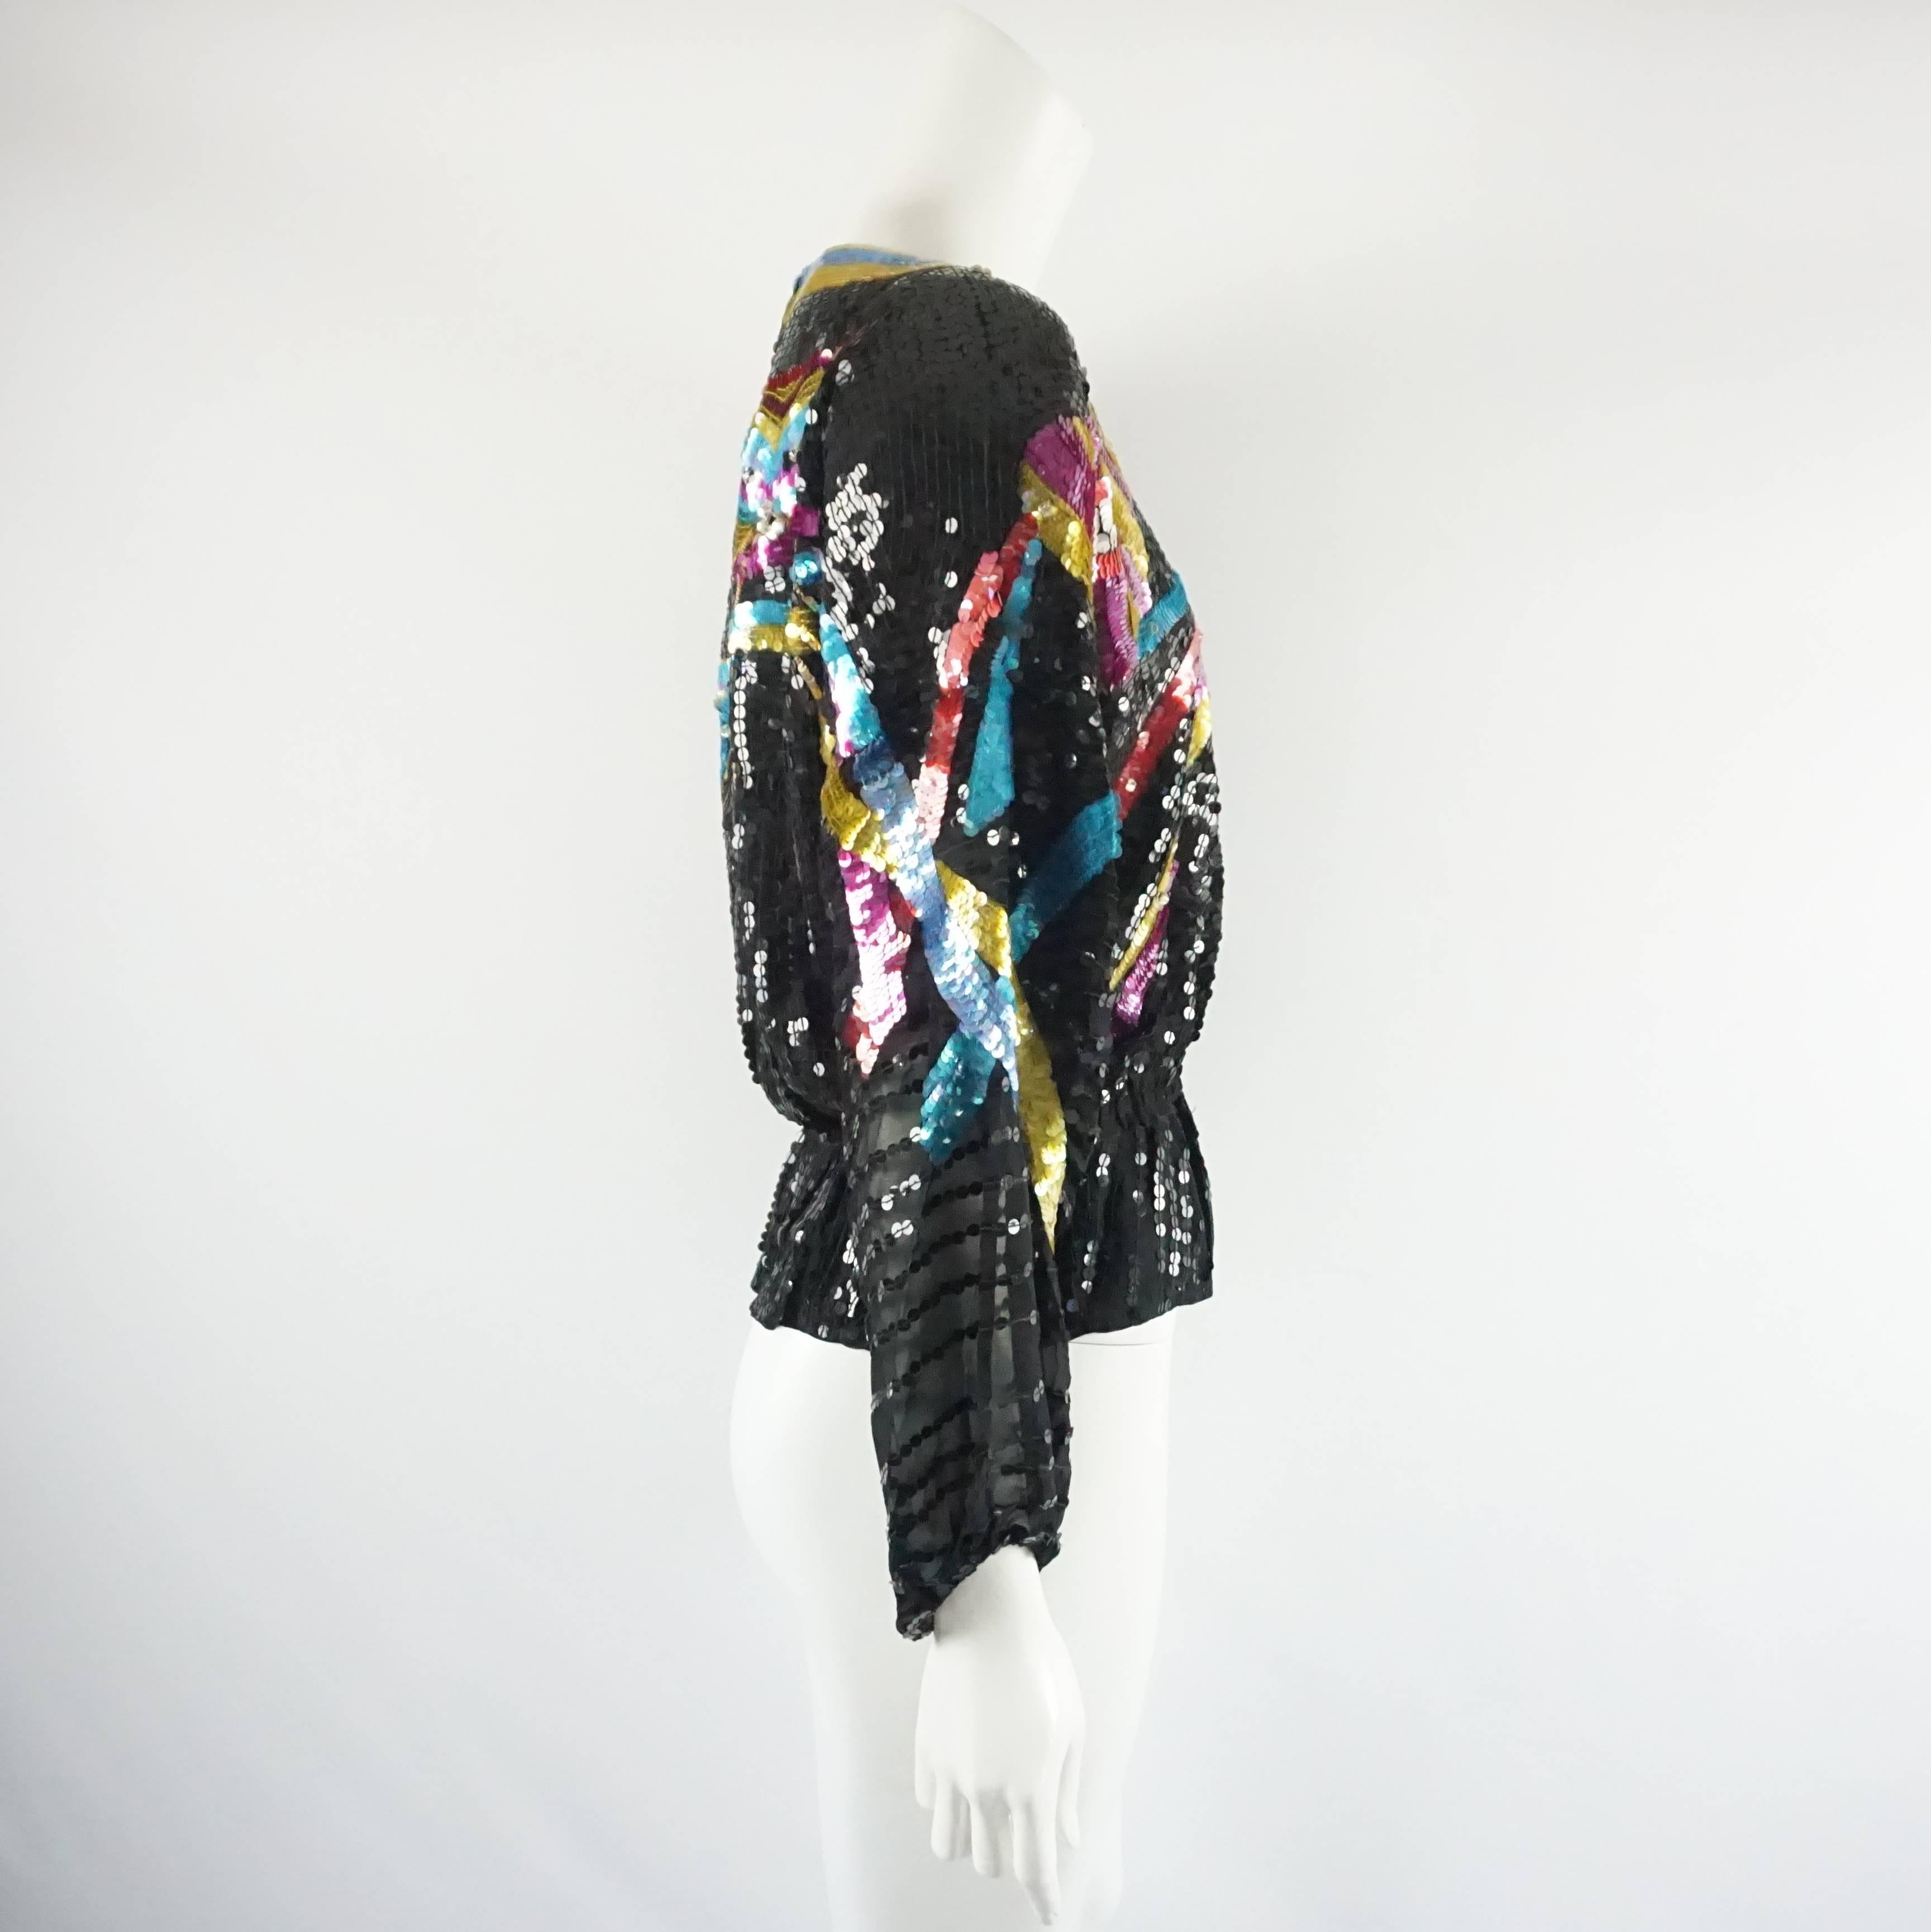 The beautiful Neil Bieff blouse from the 1970's and is black with a multi-colored masquerade theme design. It is covered in sequins and has loose sleeves. There is a cinching along the bottom and then the blouse flares out. The sleeves are sheer.